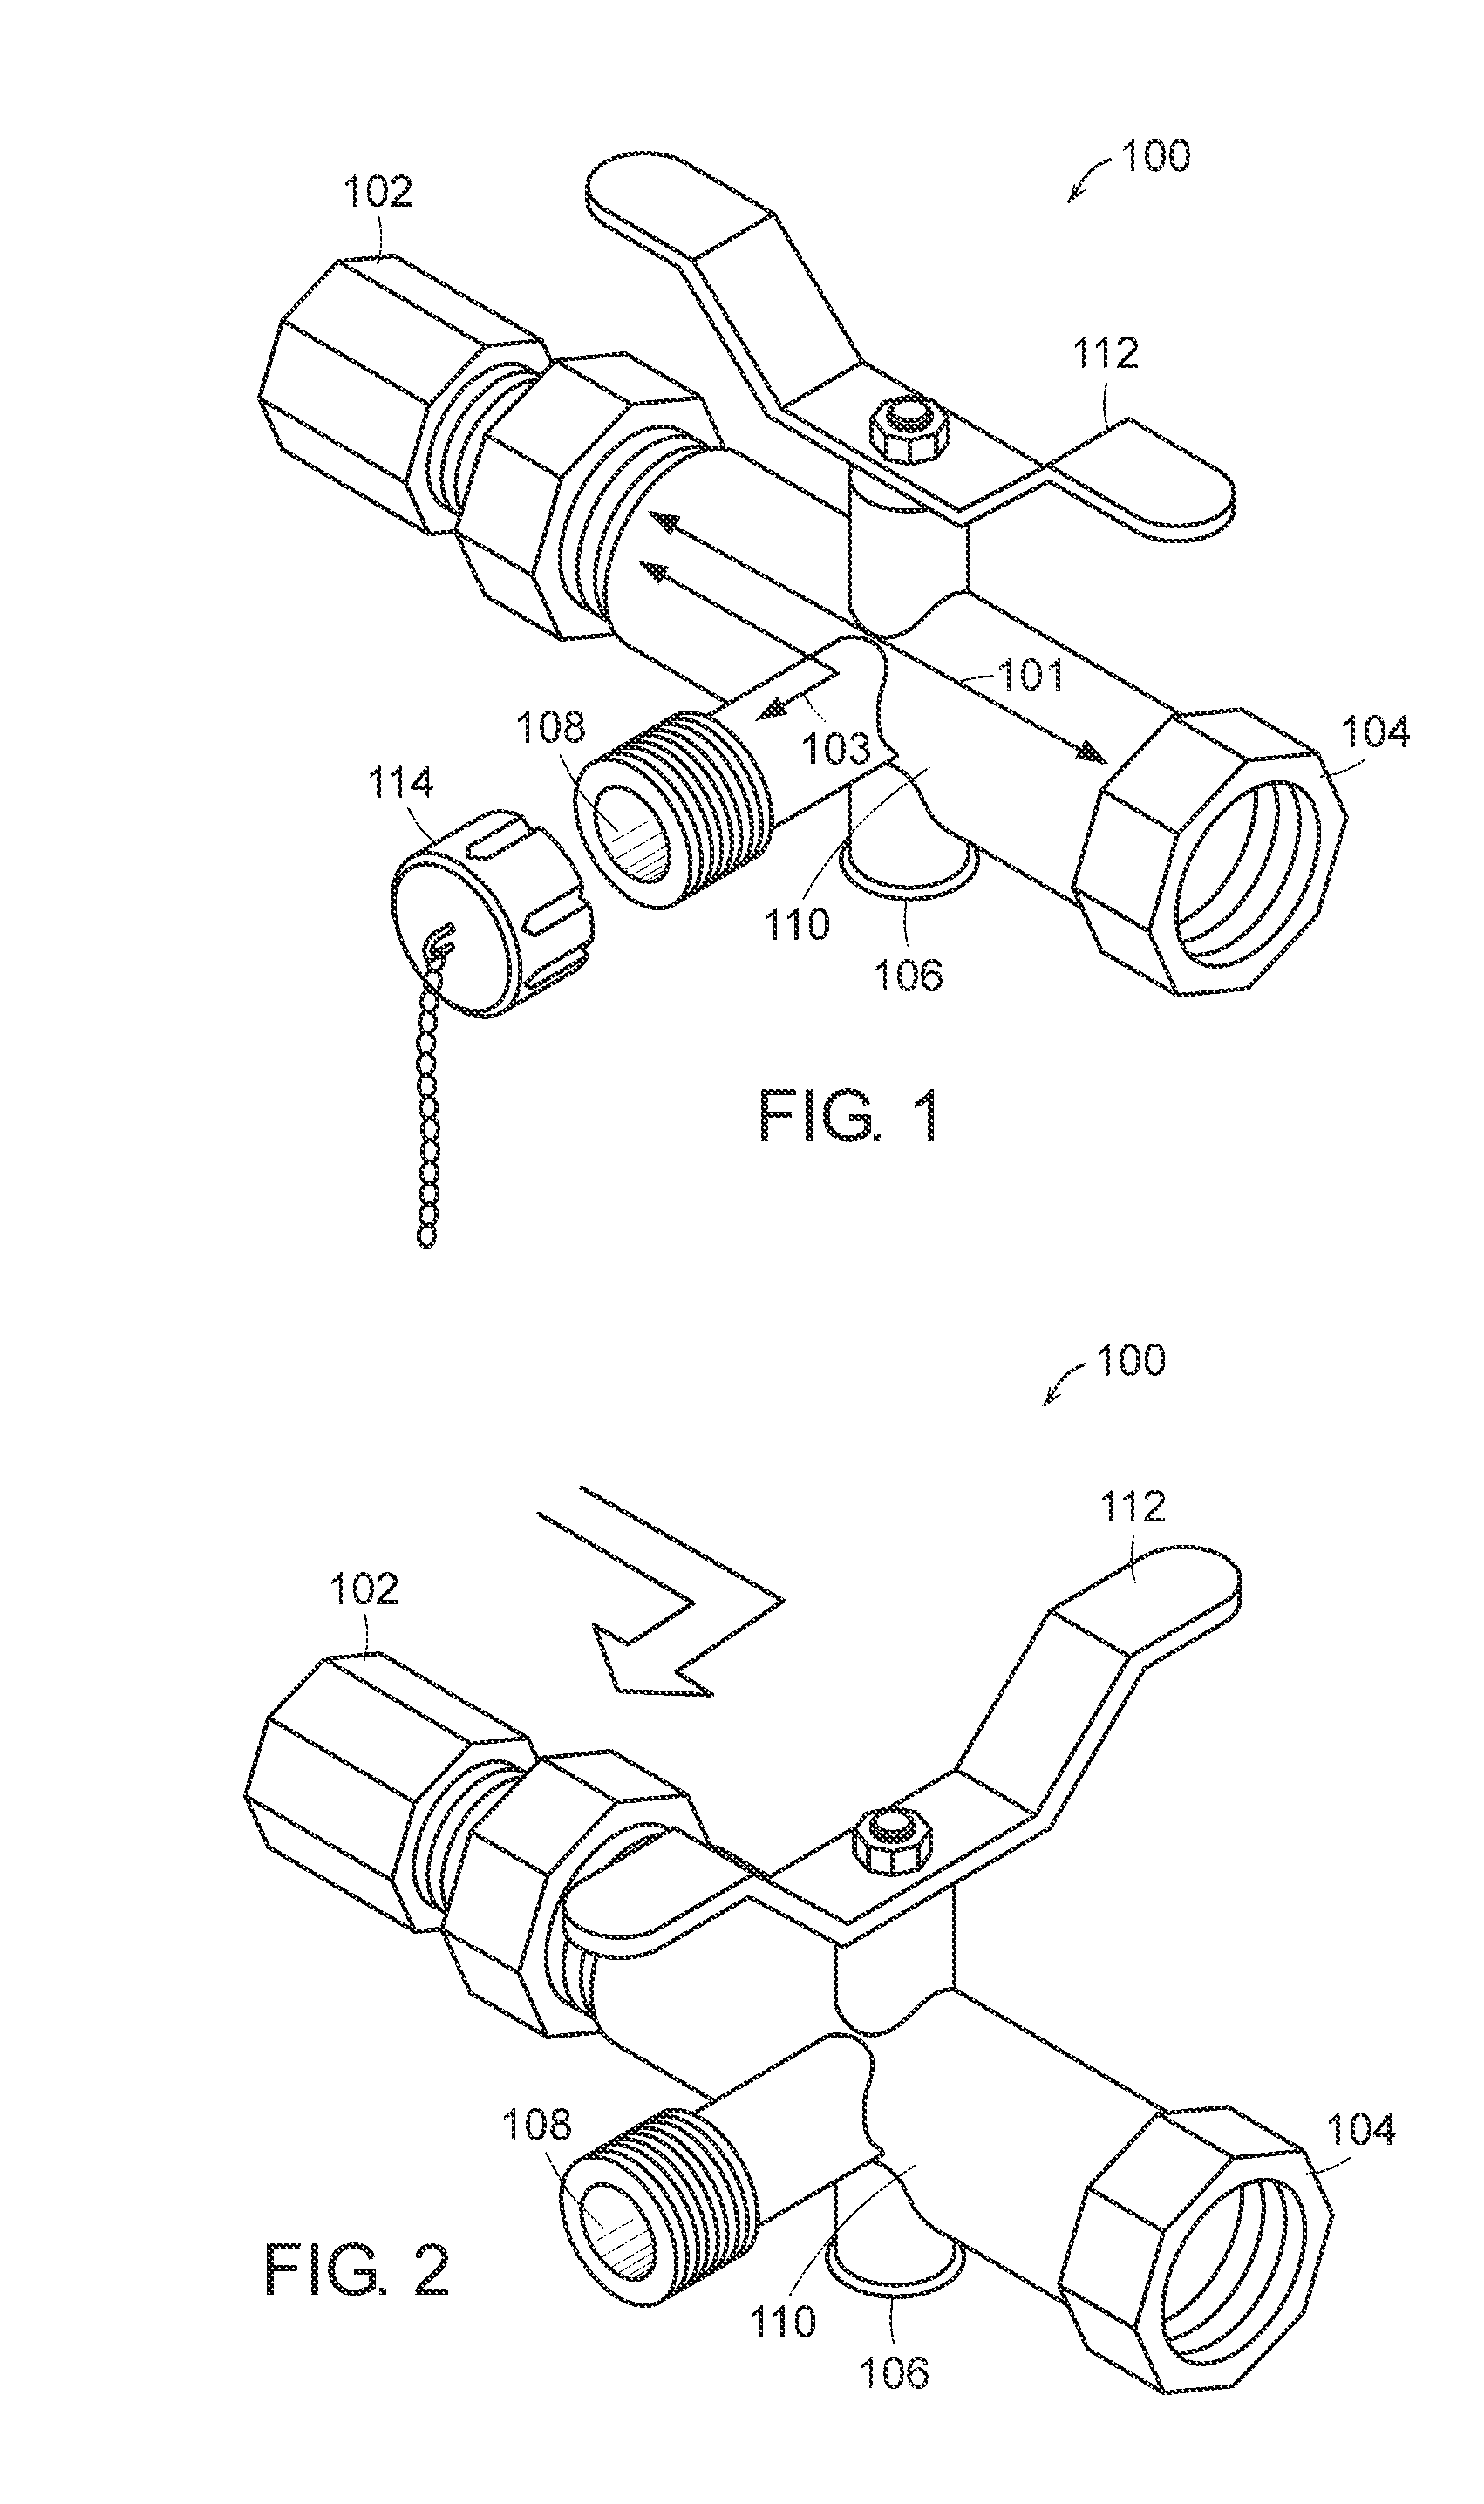 Method for isolating an appliance in a plumbing system